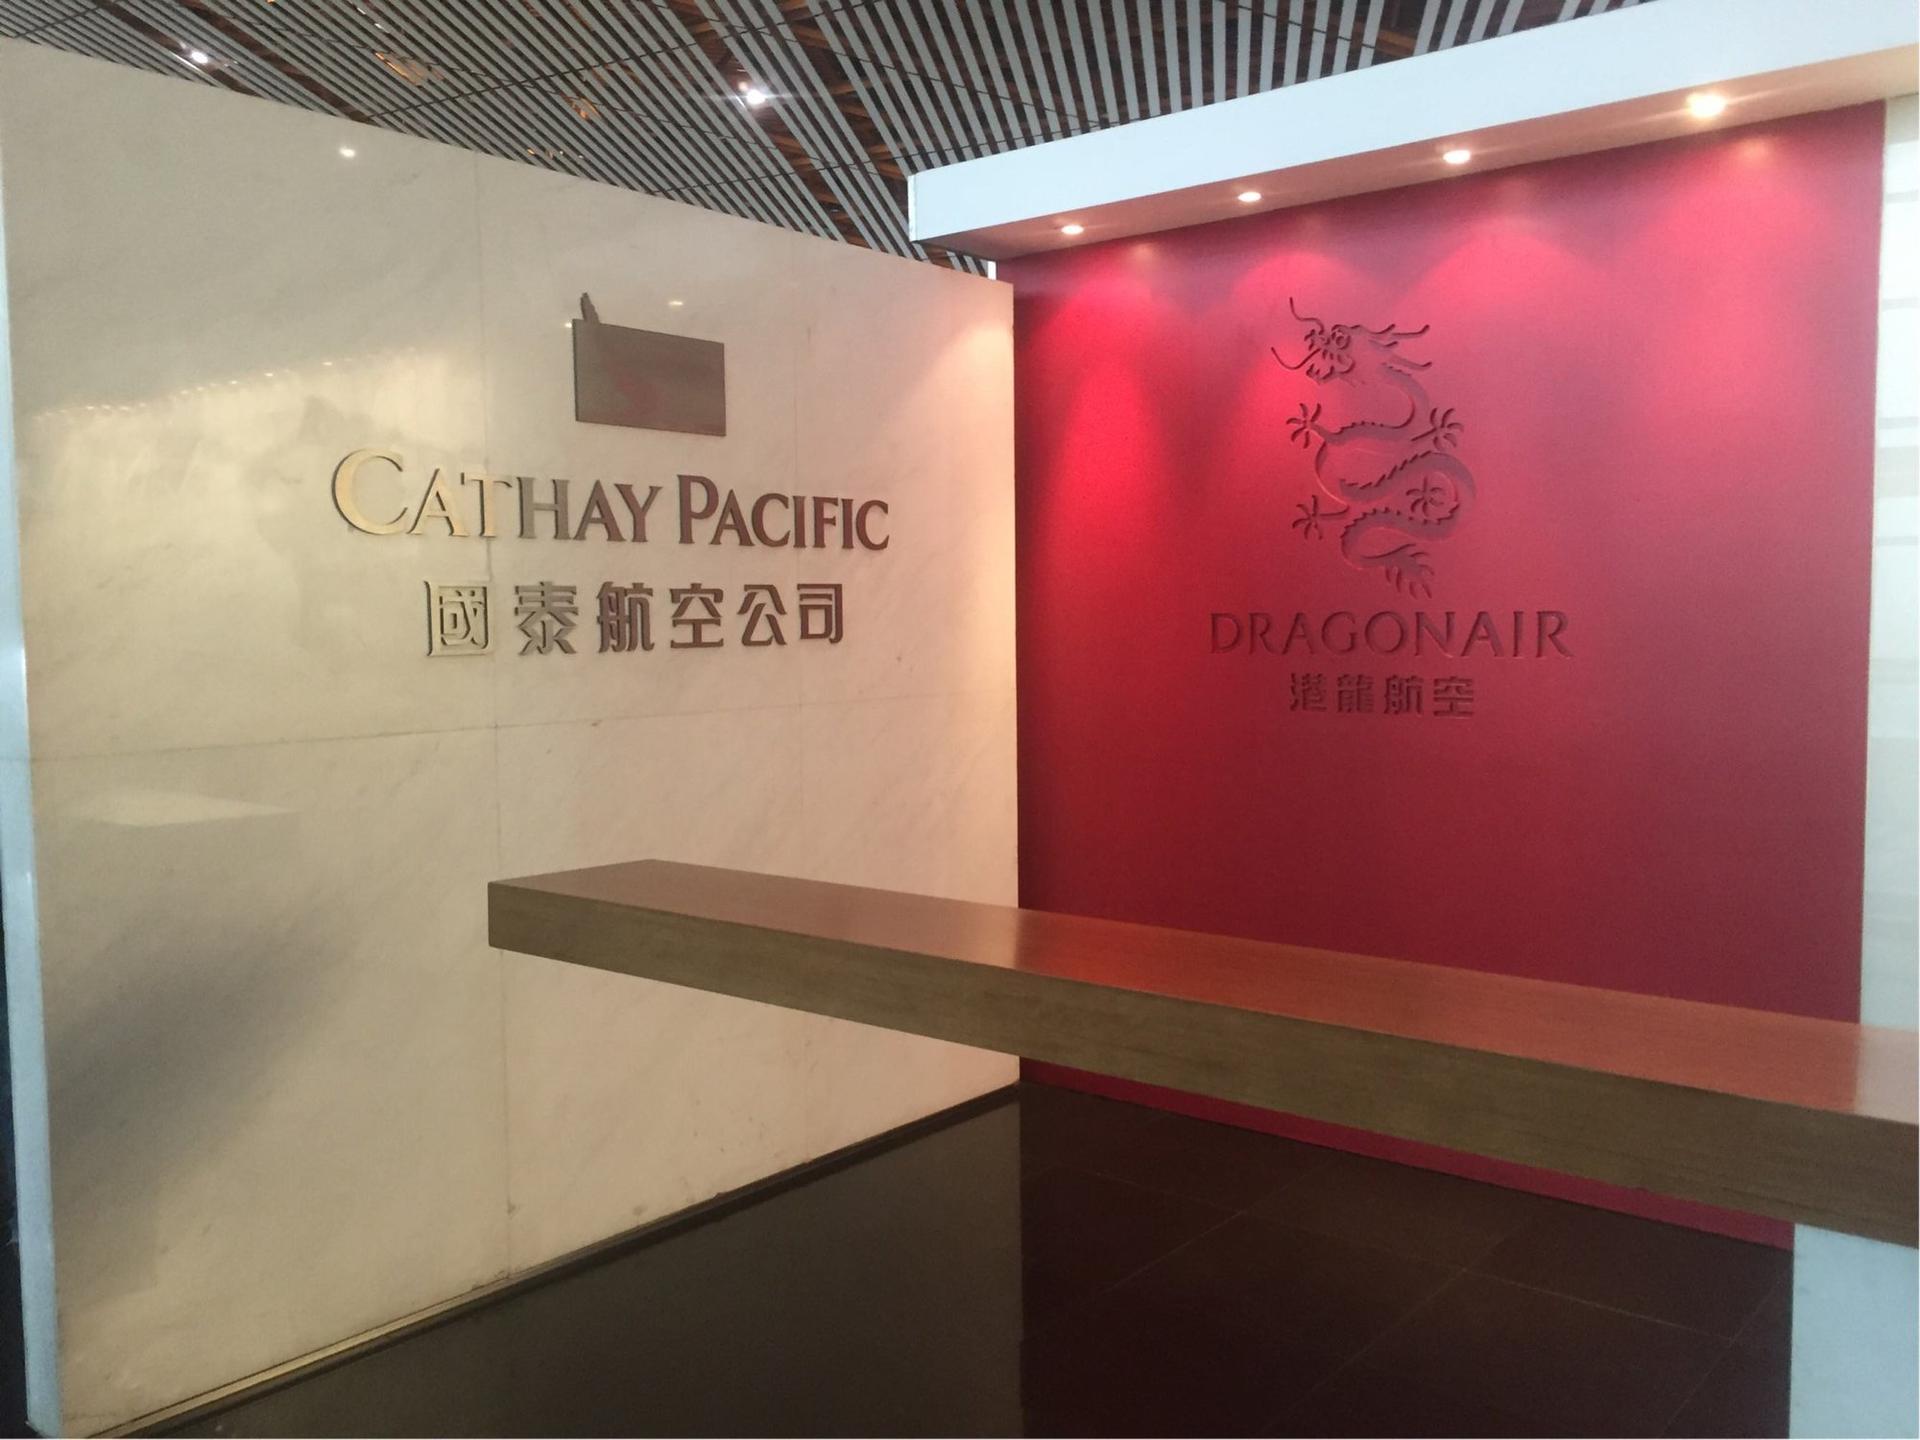 Cathay Pacific Lounge image 16 of 17